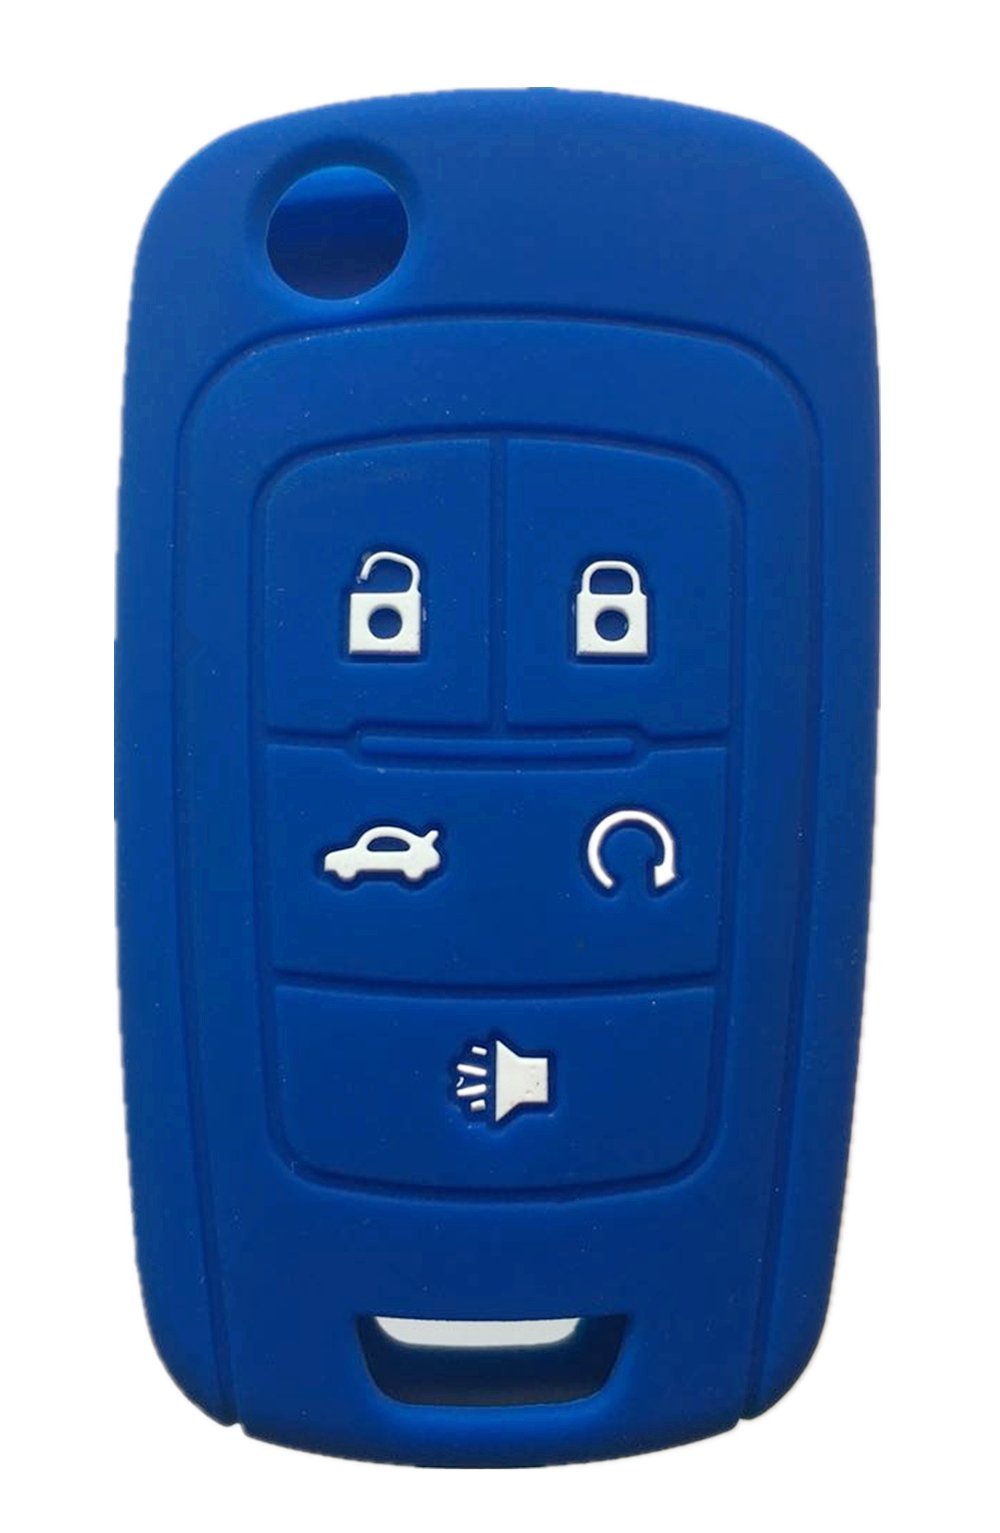  [AUSTRALIA] - Rpkey Silicone Keyless Entry Remote Control Key Fob Cover Case protector For Buick Encore LaCrosse Regal Verano OHT01060512 5461A-01060512